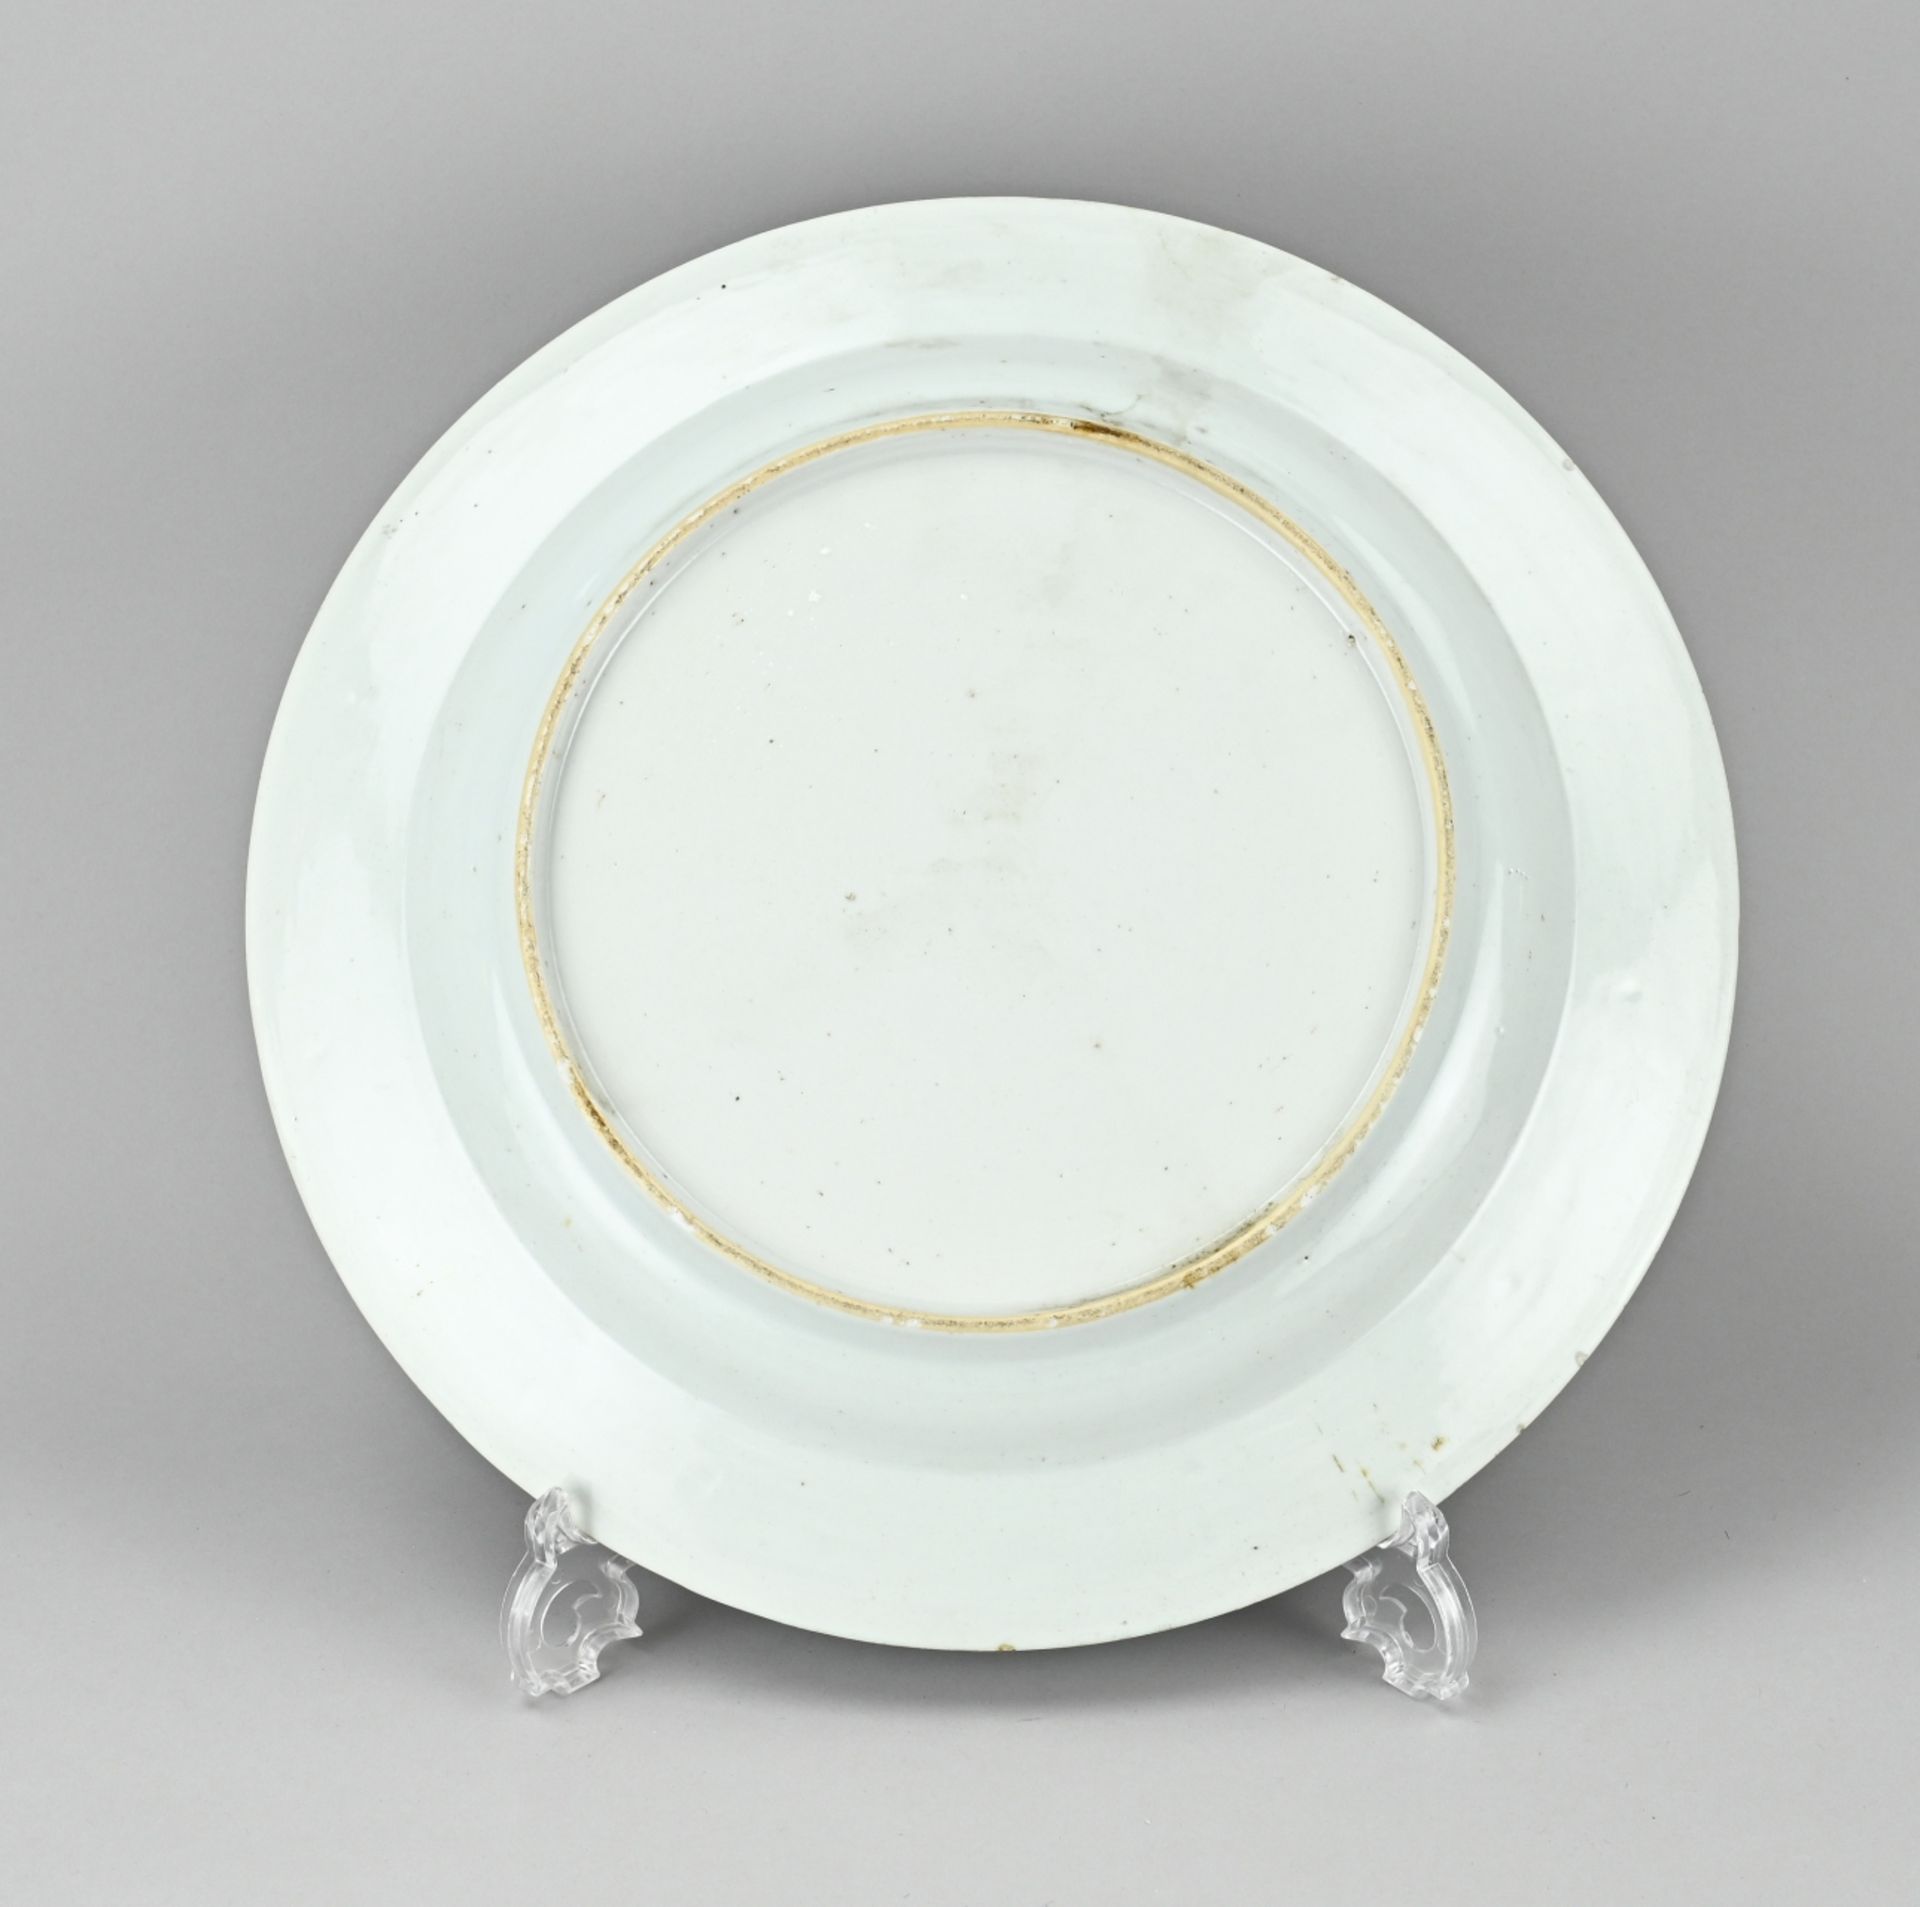 Chinese plate Ã˜ 36.2 cm. - Image 2 of 2